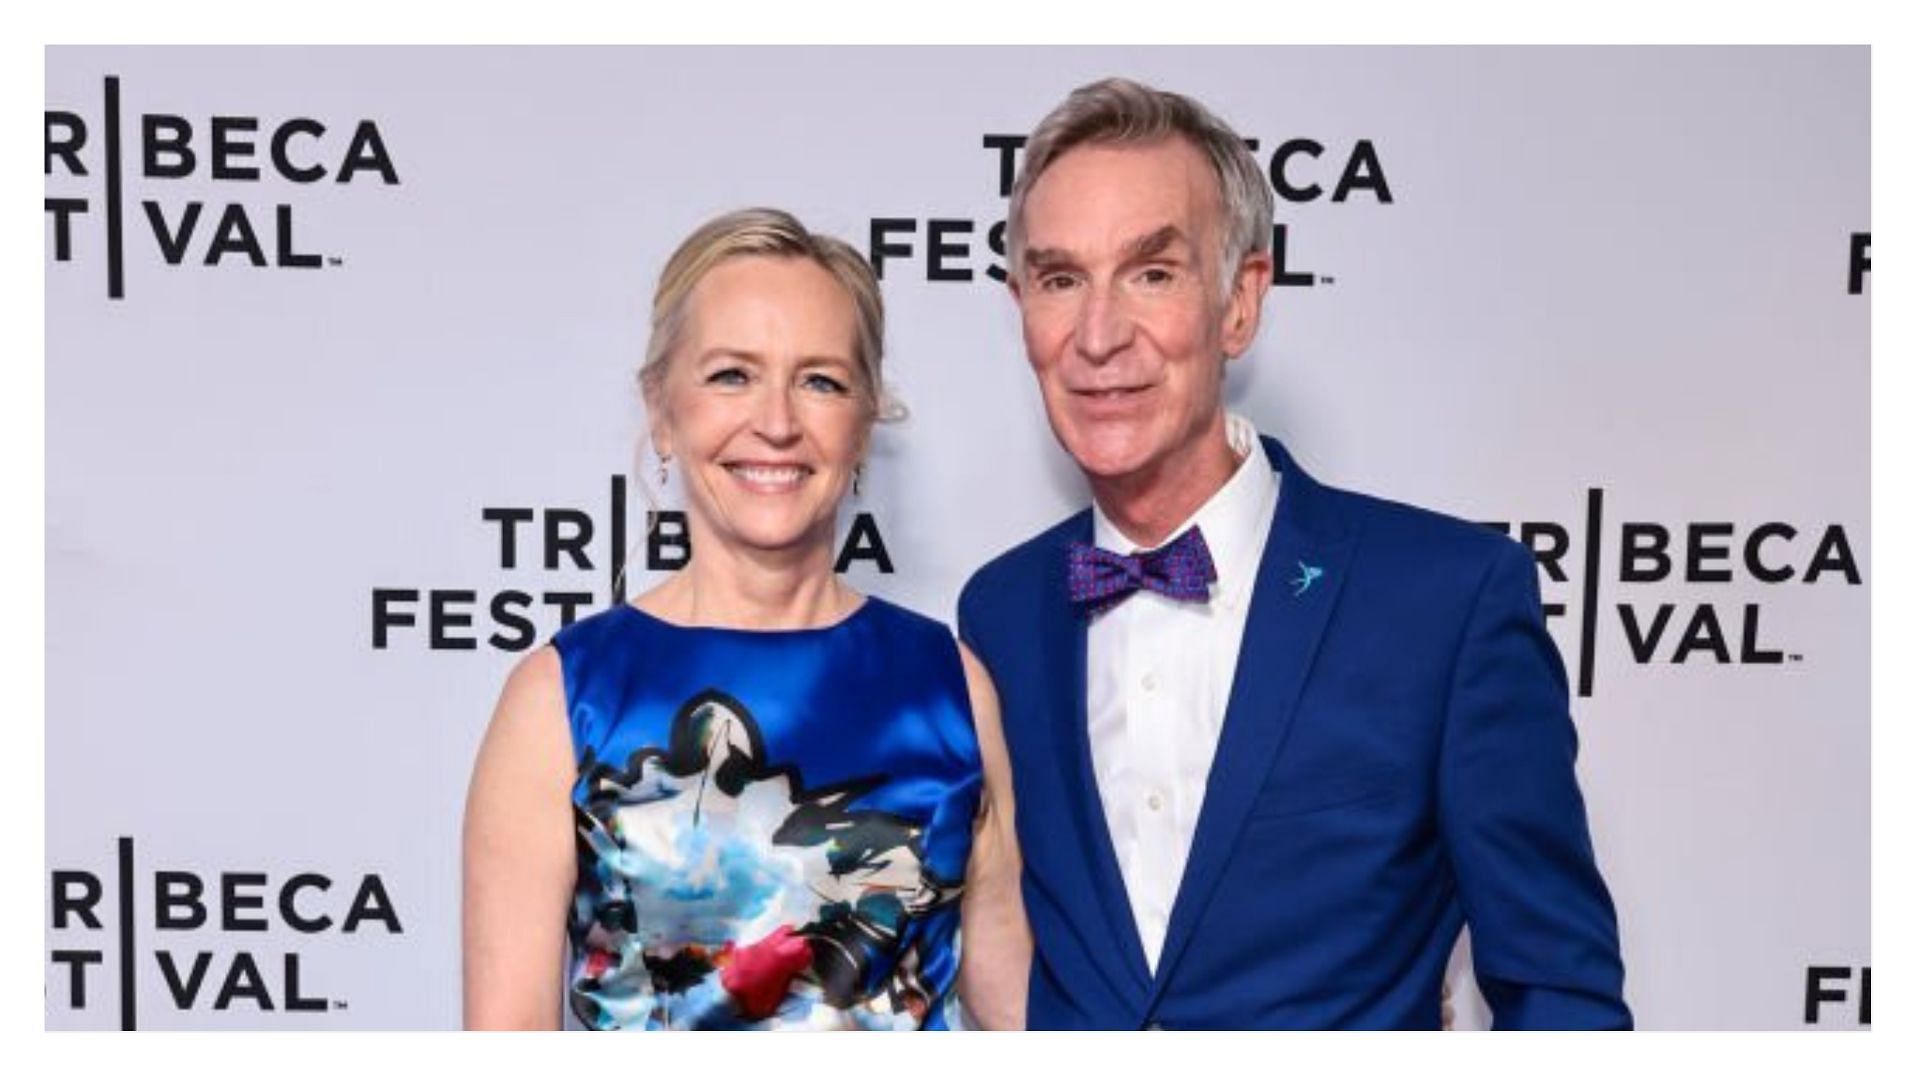 Liza Mundy and Bill Nye are now married (Image via Jamie McCarthy/Getty Images)